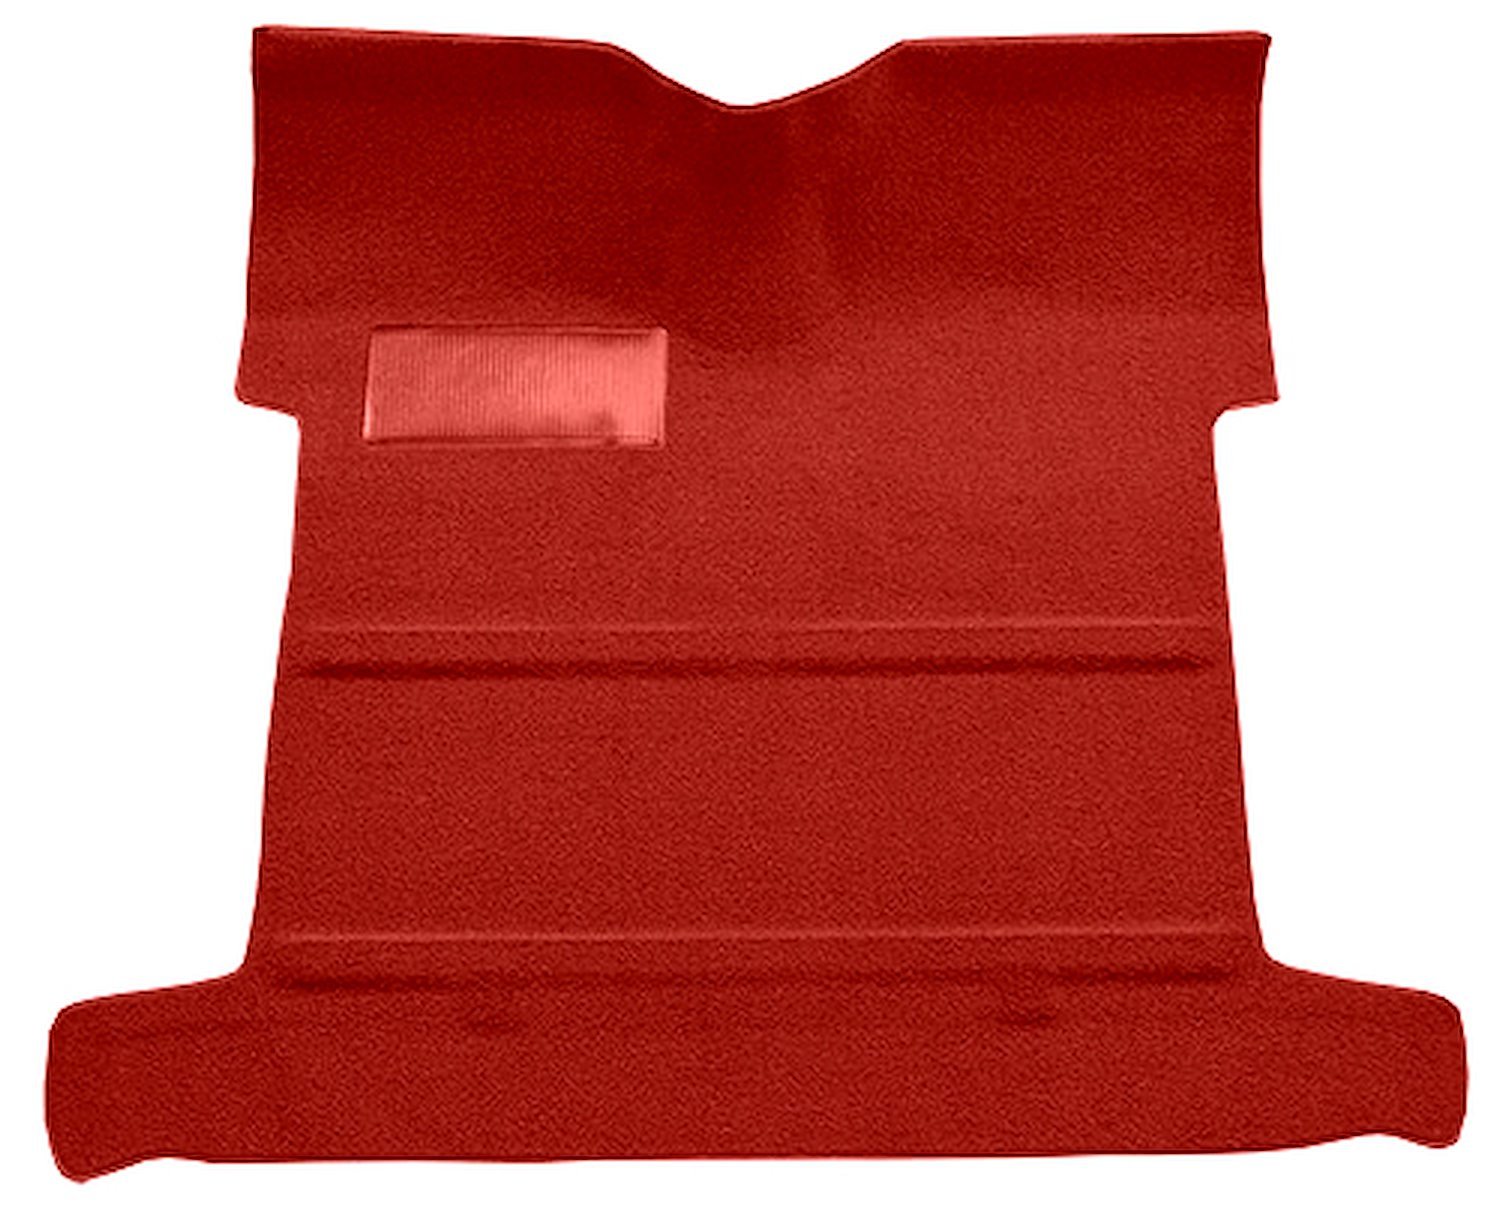 Molded Loop Carpet for 1959 GM 3100 Regular Cab Trucks w/Low Tunnel [OE-Style Jute Backing, Red]